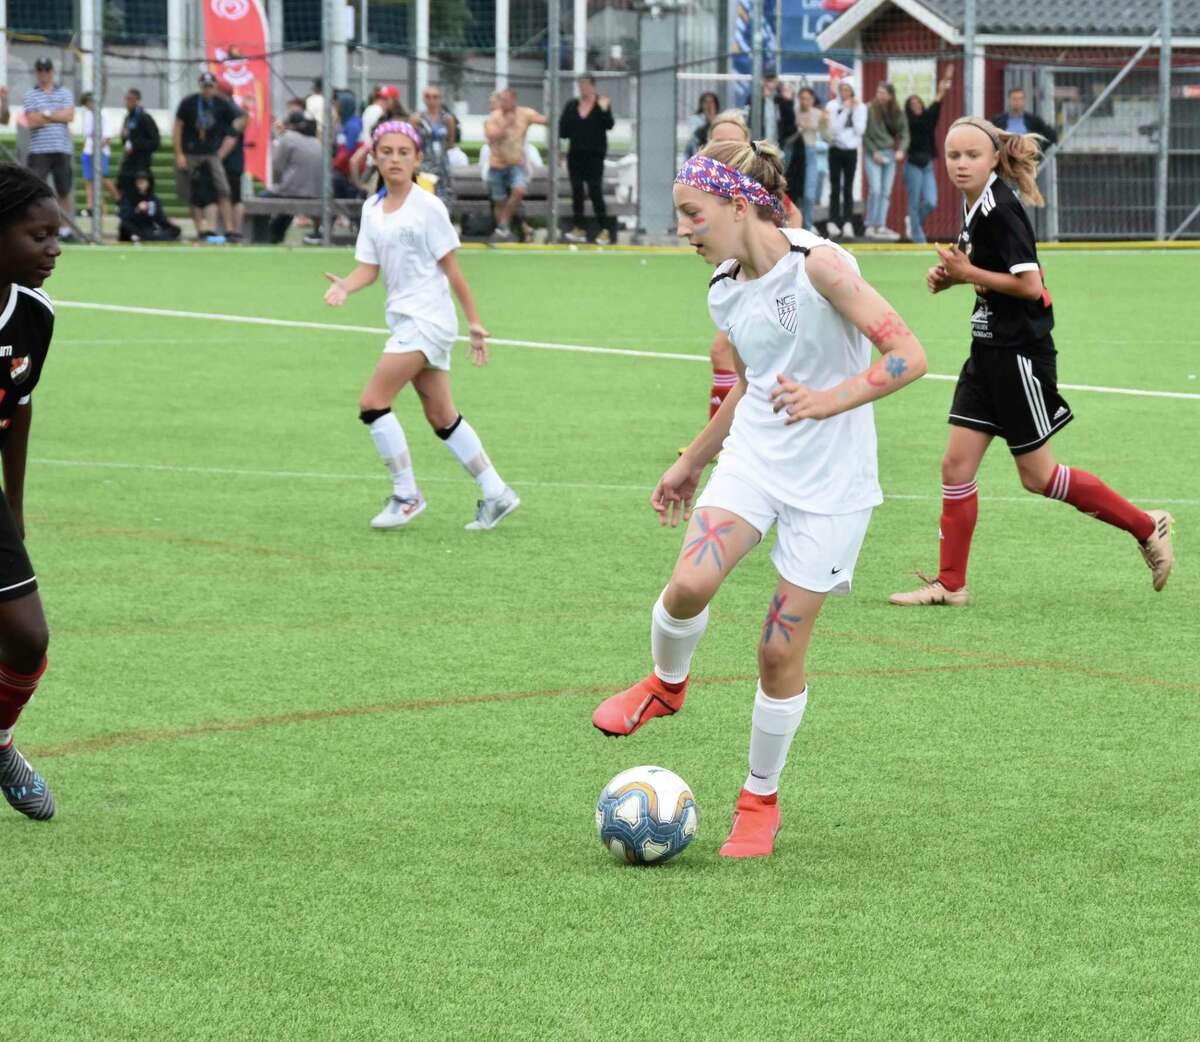 Sara Rieger controls the ball during a game at the Gothia Cup in Sweden.